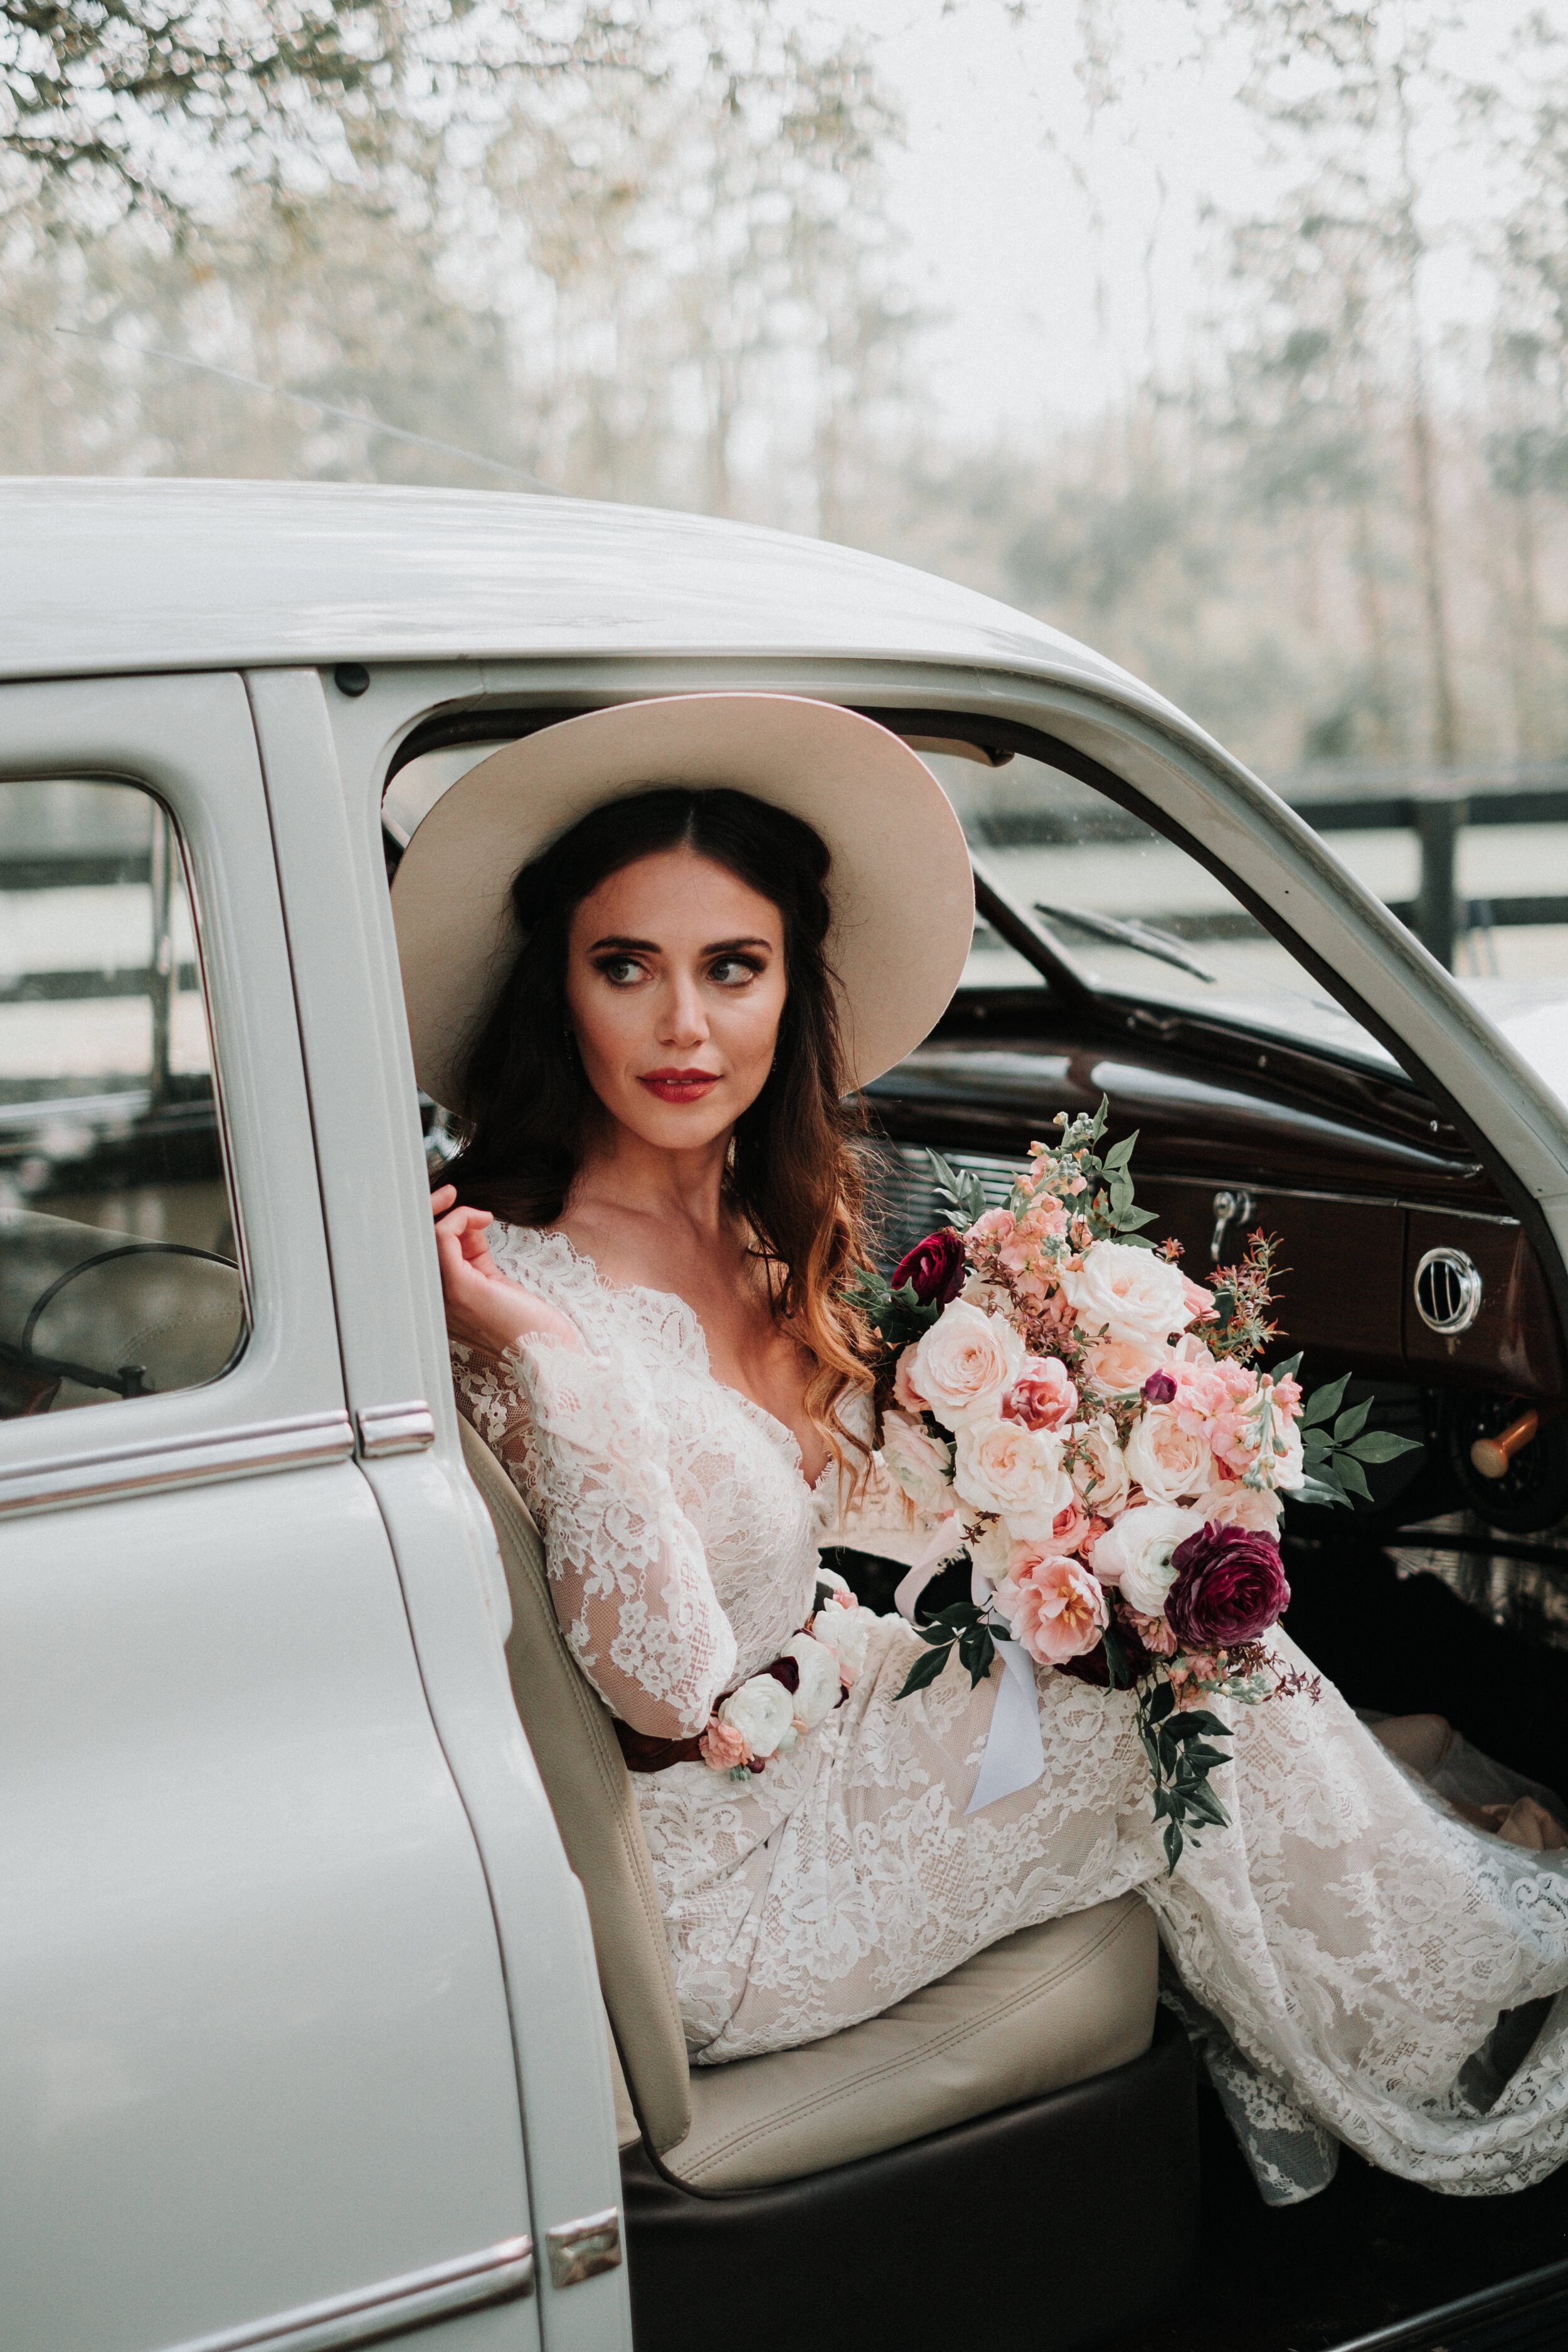 ivory-and-beau-blog-featured-in-south-magazine-bridal-shop-bridal-boutique-wedding-dresses-bridal-gown-wedding-gown-styled-shoot-photo-shoot-wedding-inspiration-Swamp Fox Farms  (51 of 101).jpg